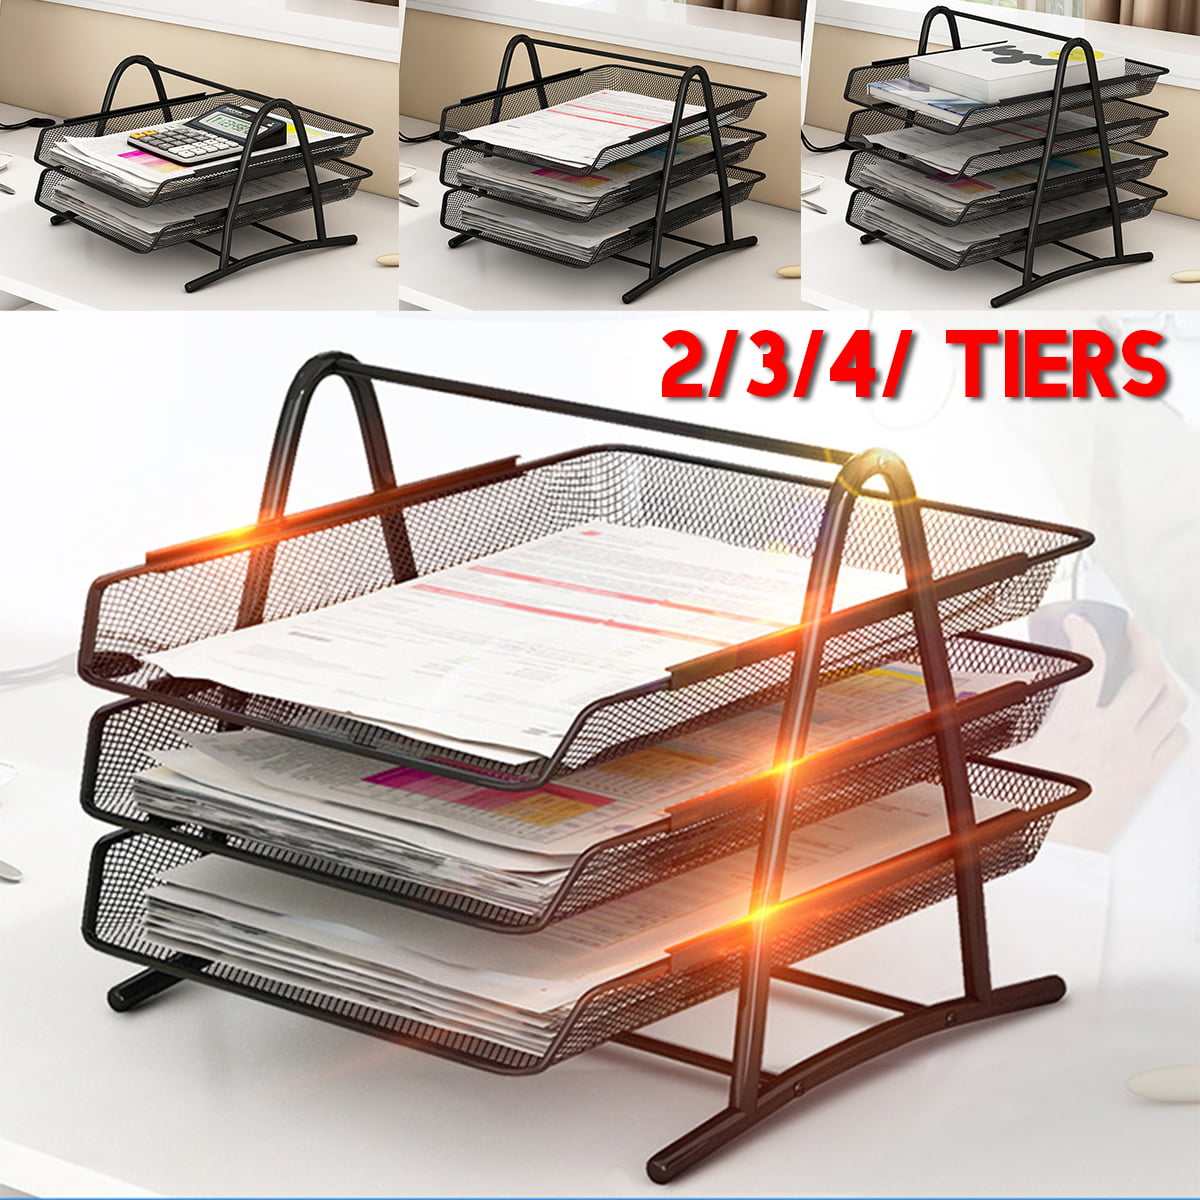 A4 Wire Mesh Filing Tray Black Silver 3-4 Tier Document Desk Paper Filer NEW 